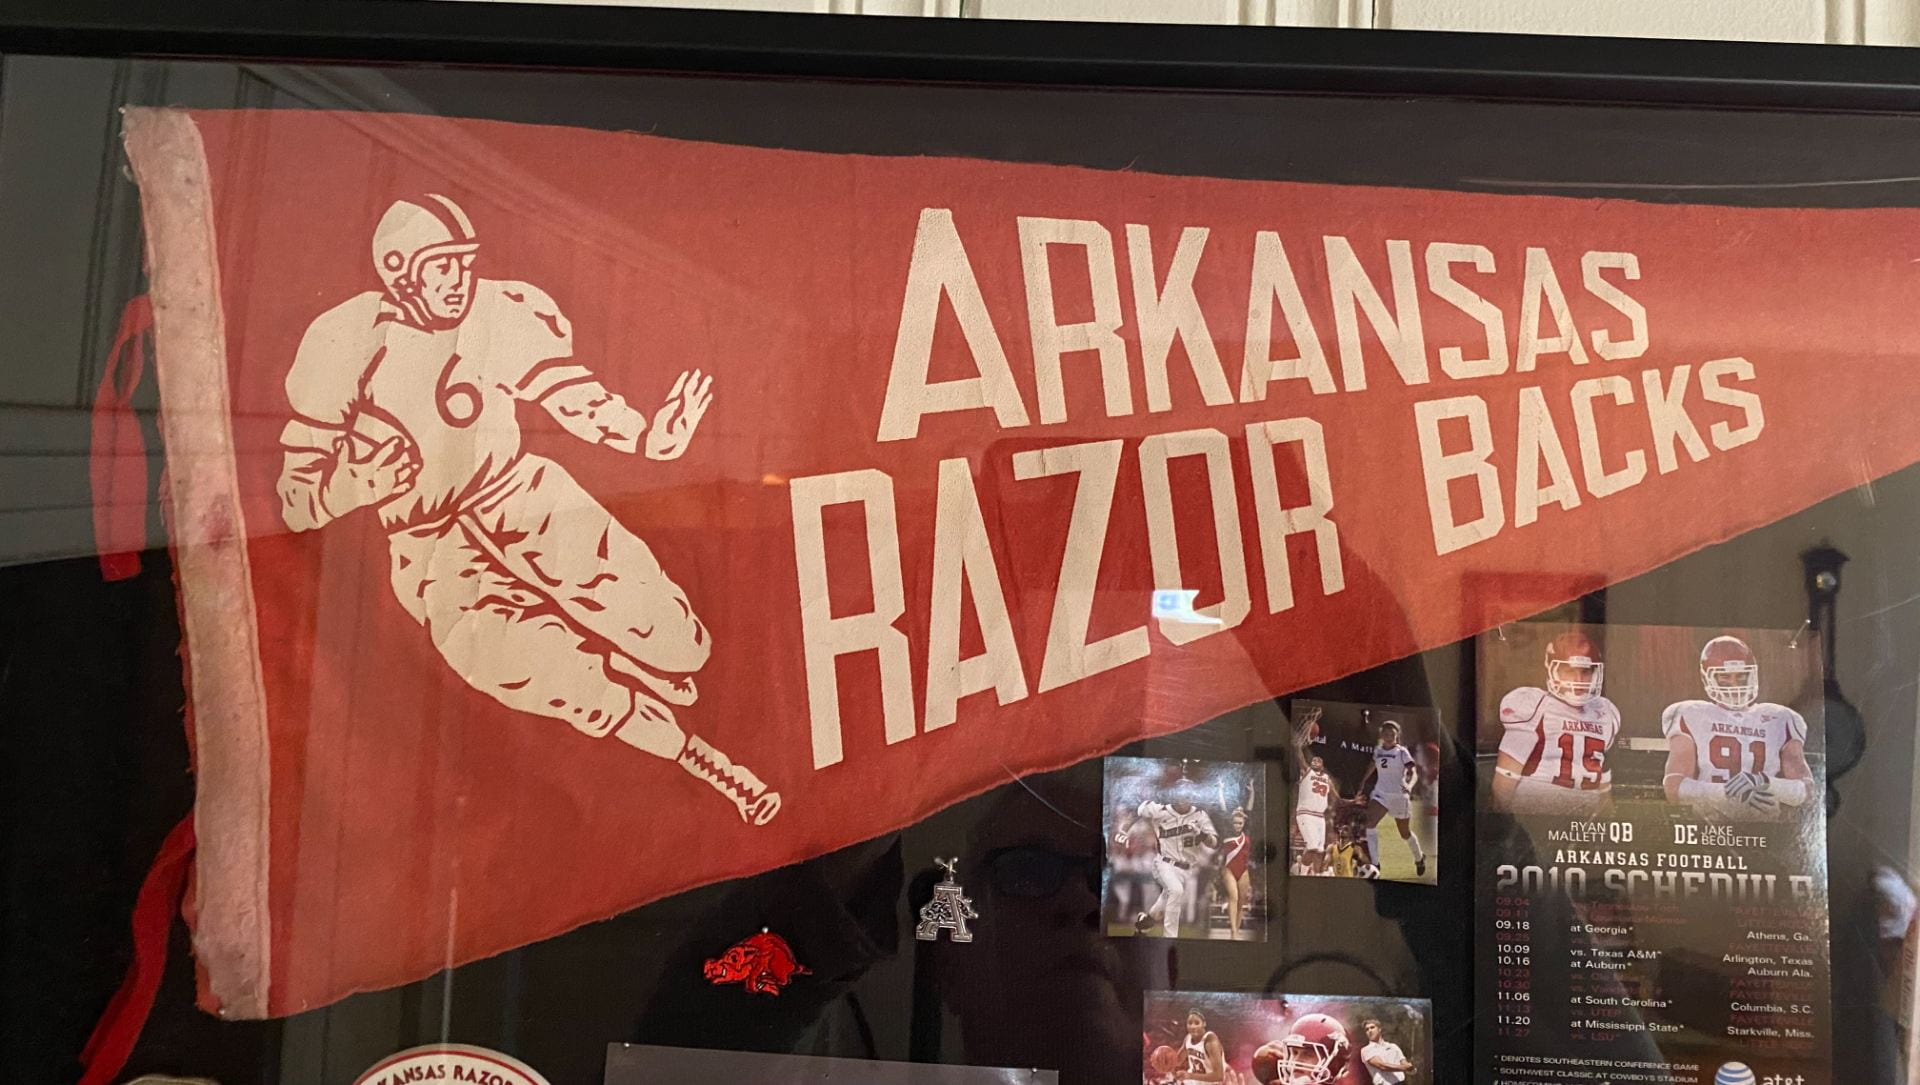 A red pennant with a football player at the widest part and "Arkansas Razorbacks" to its right. There are various U of A athletic photos around it.